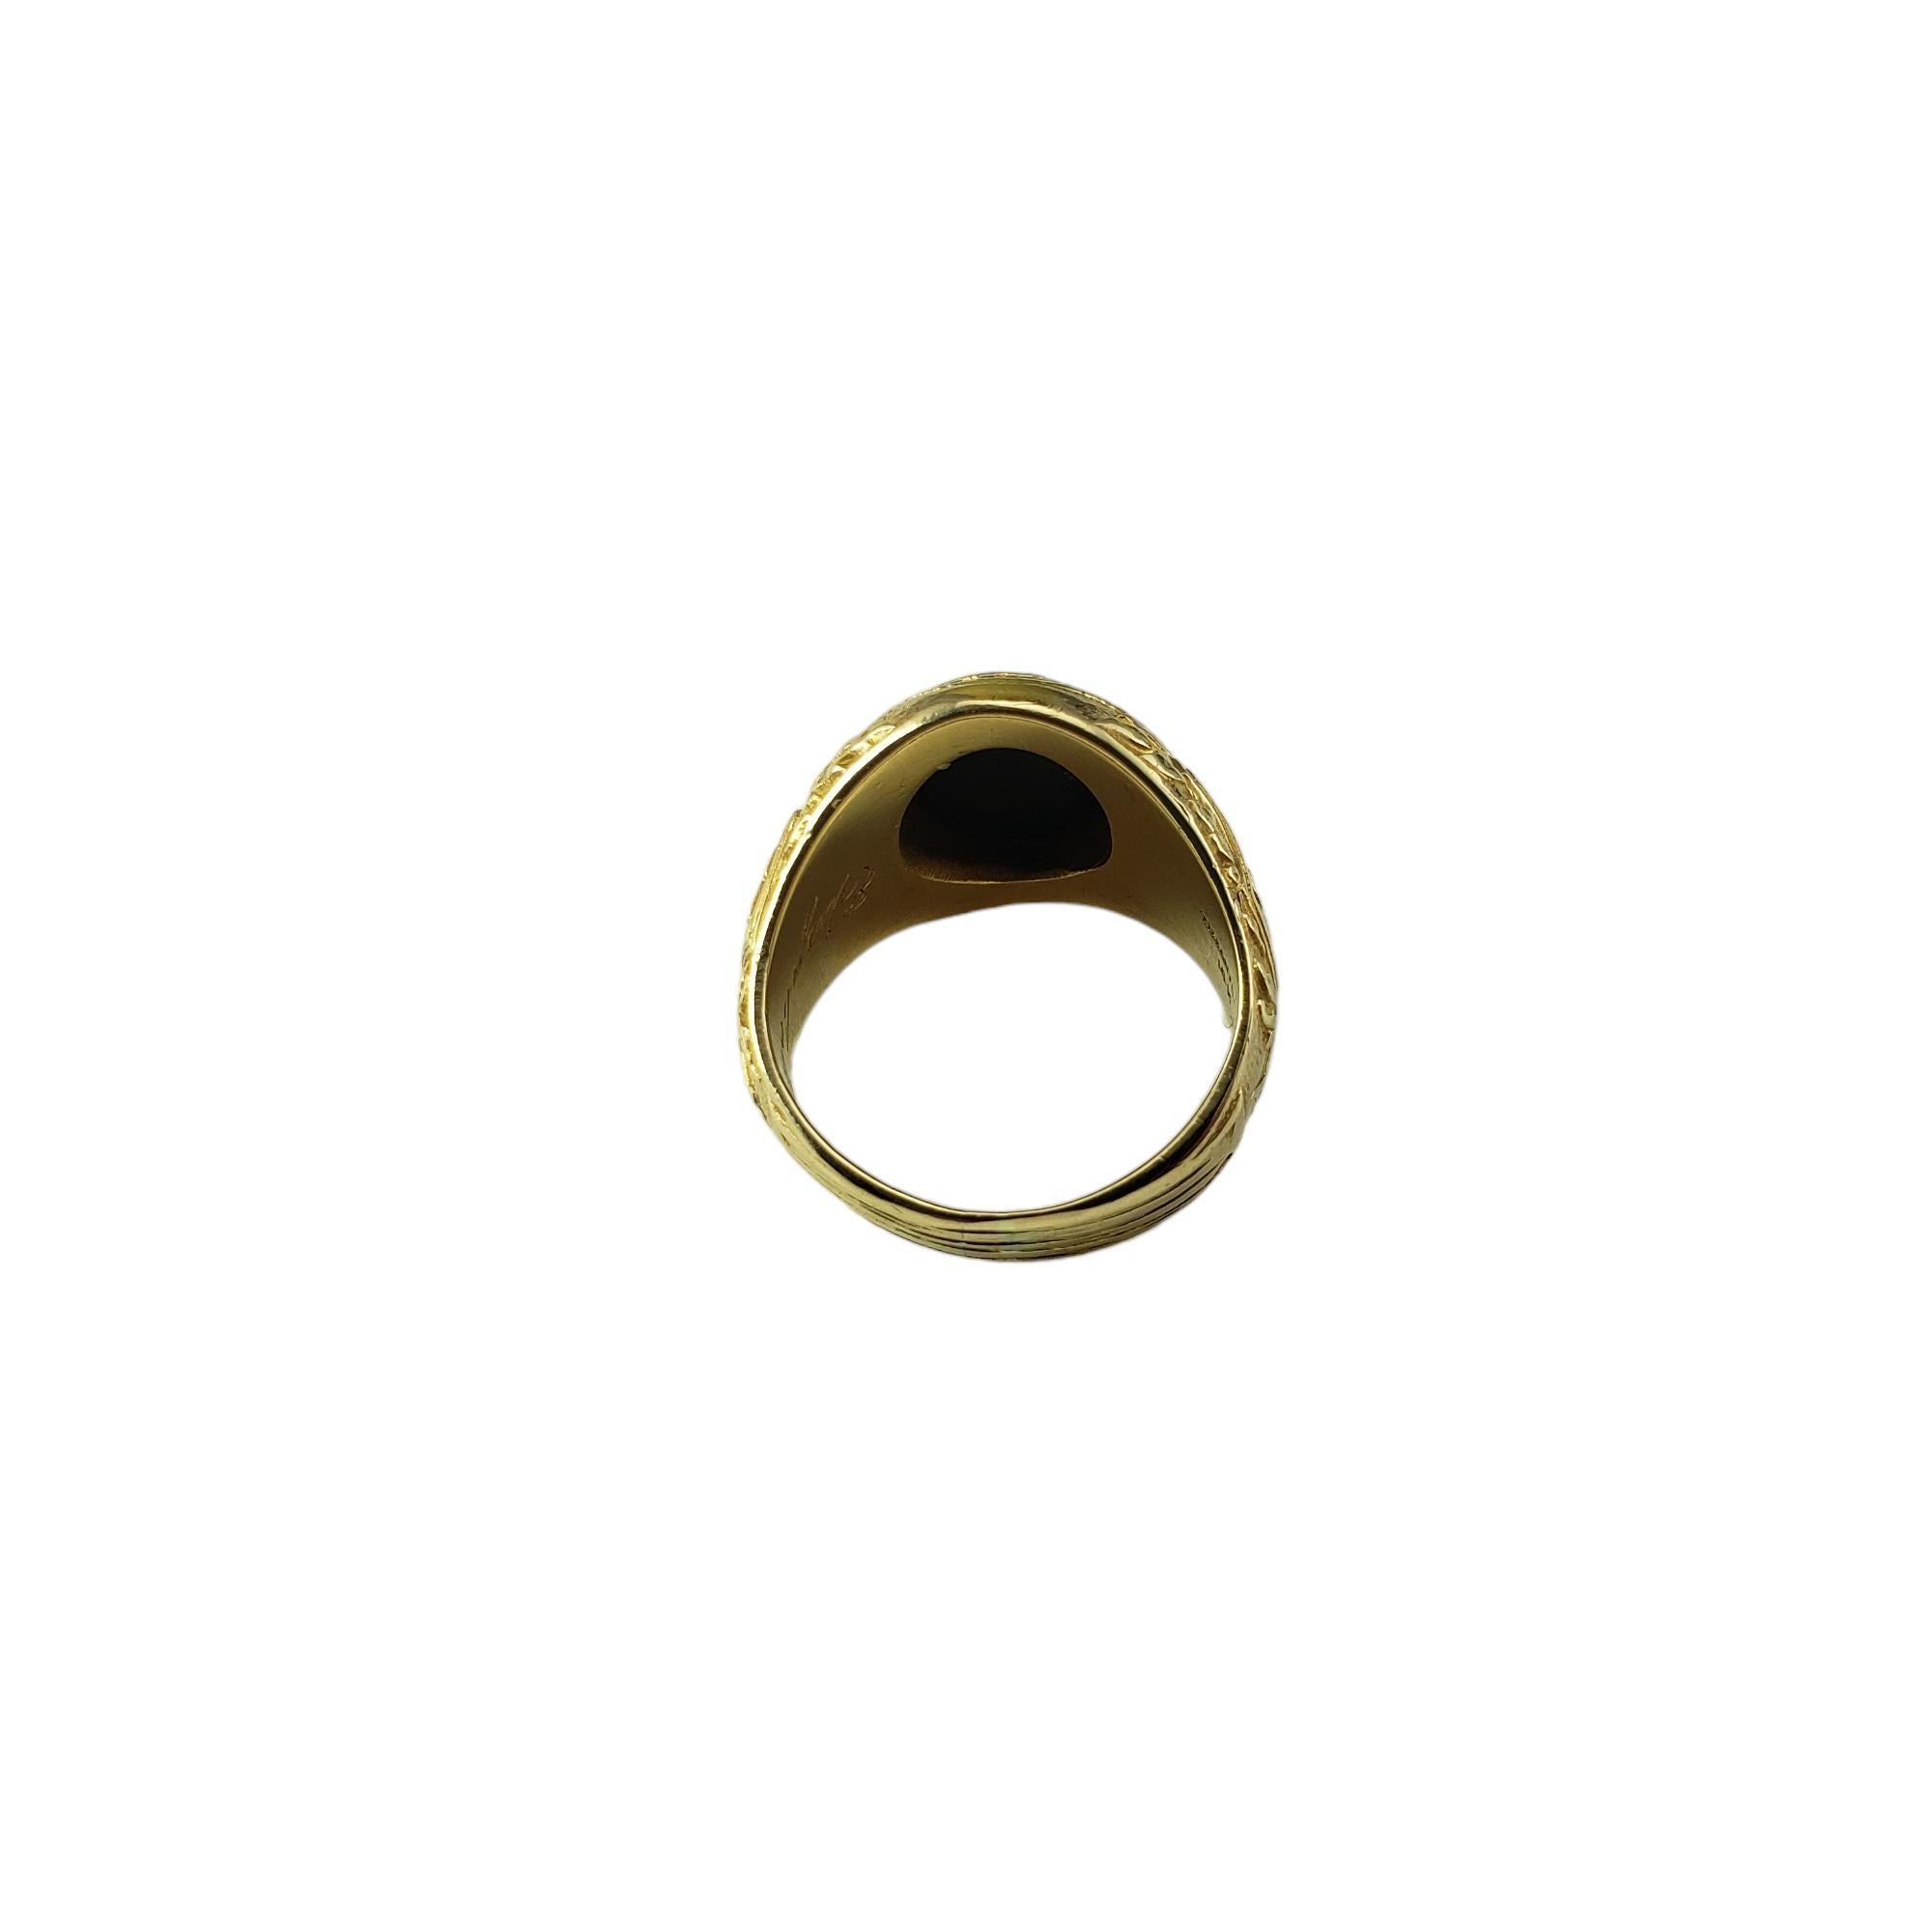 Women's Tiffany & Co. 14K Yellow Gold 1933 College Ring Size 5.25 #17164 For Sale